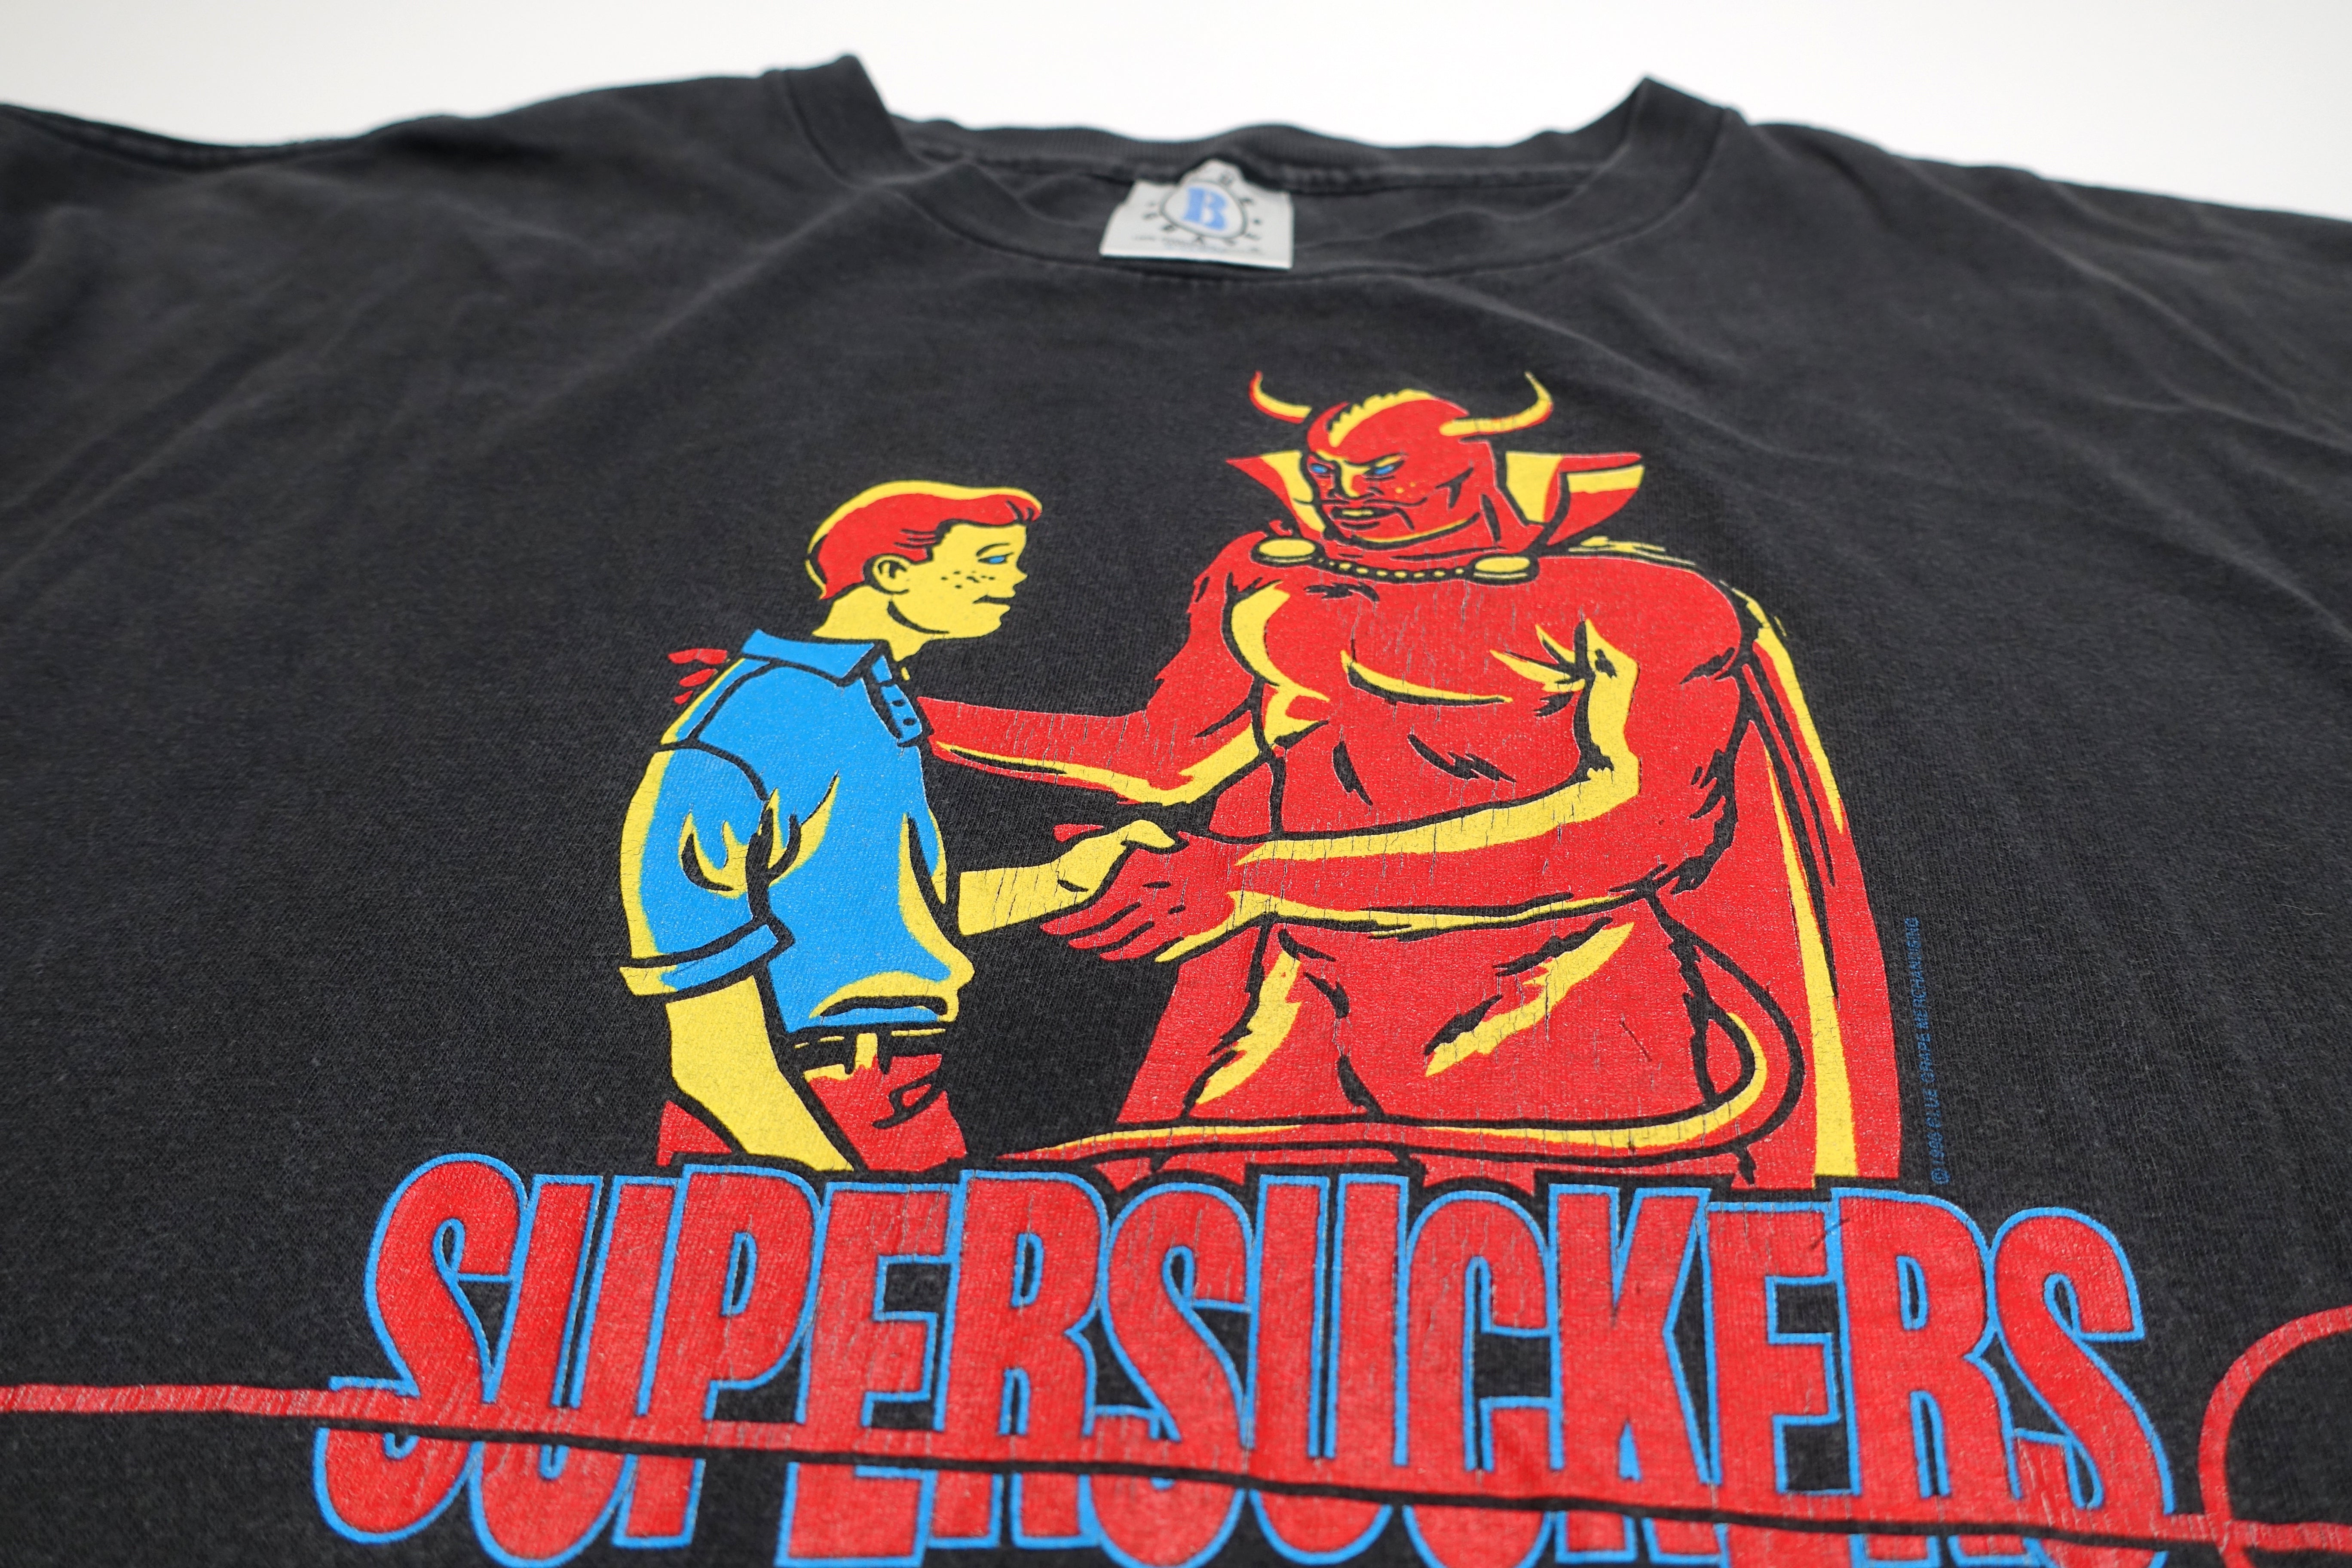 Supersuckers - The Smoke Of Hell 1992 Tour Shirt Size XL